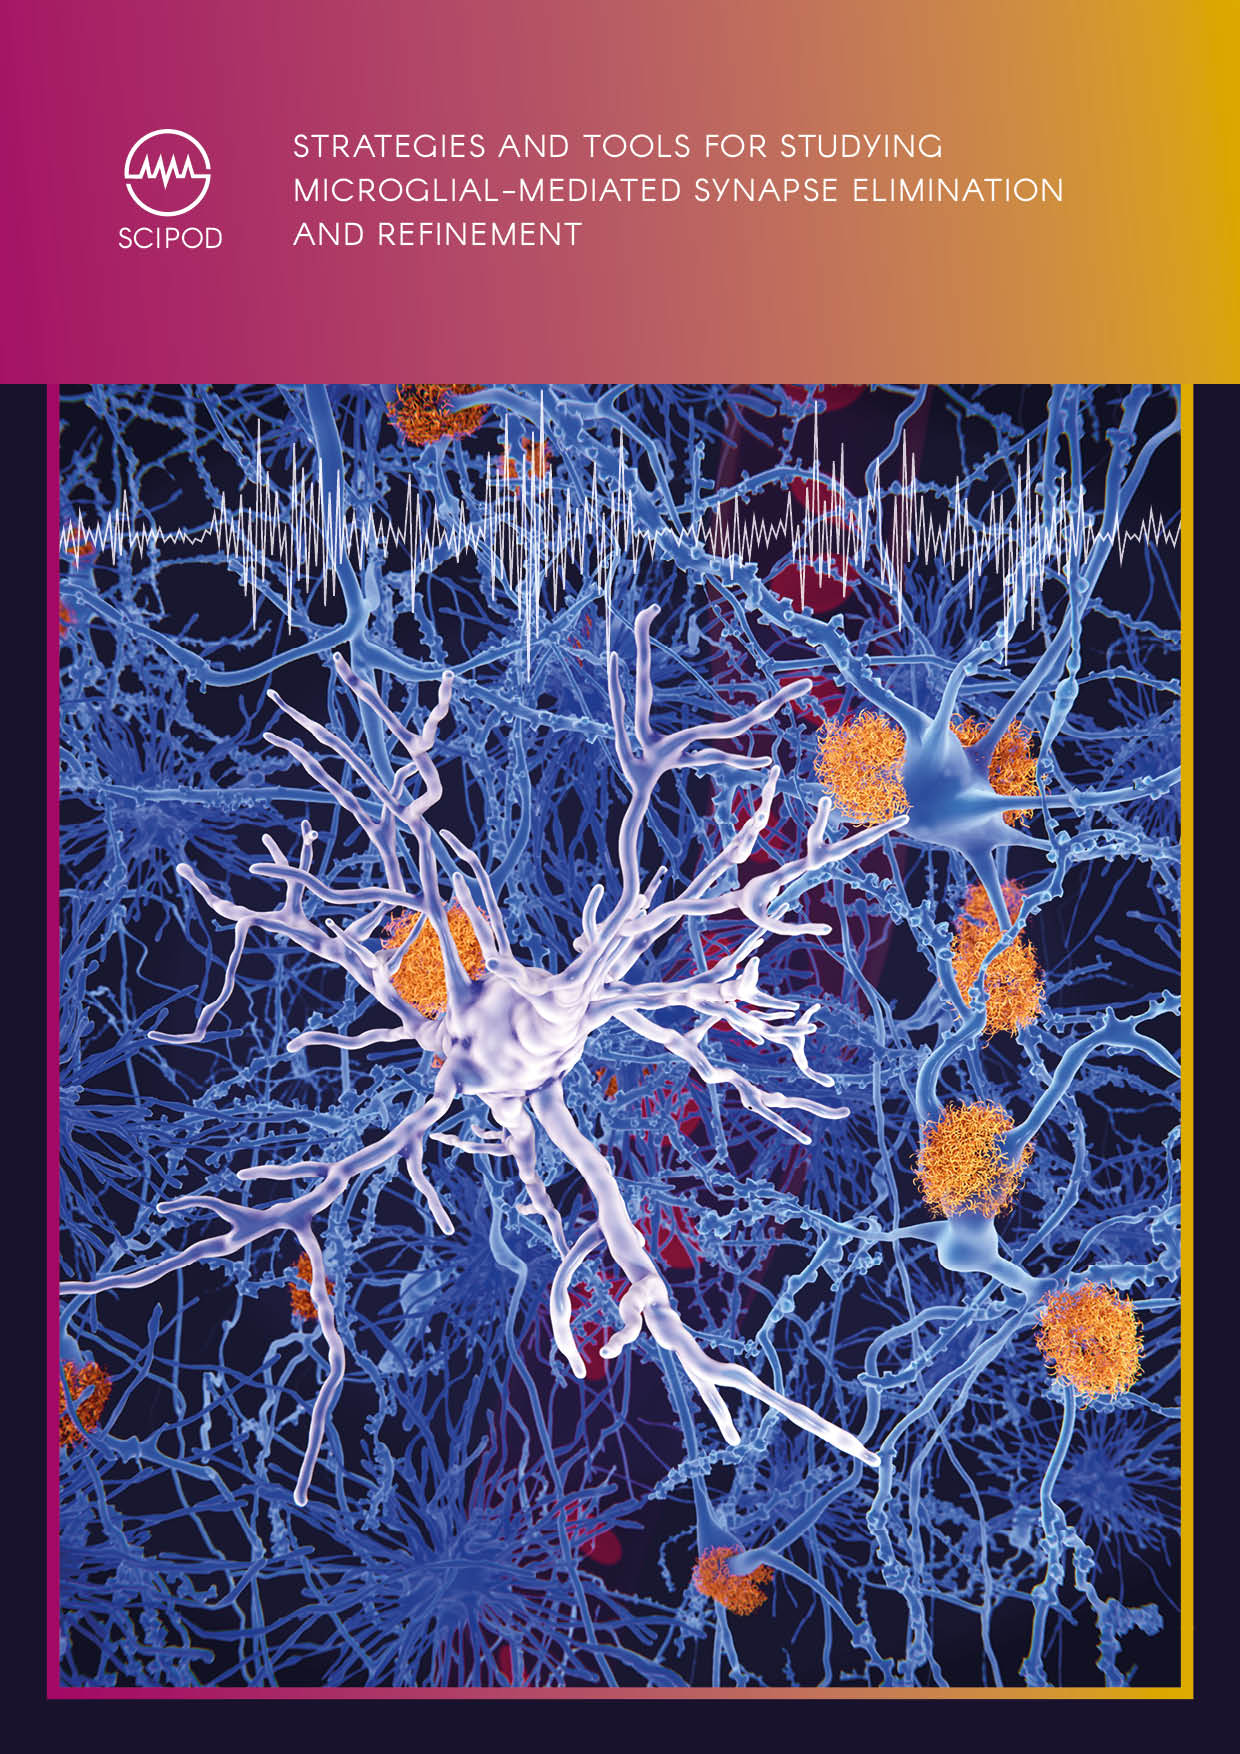 Strategies and Tools for Studying Microglial-Mediated Synapse Elimination and Refinement